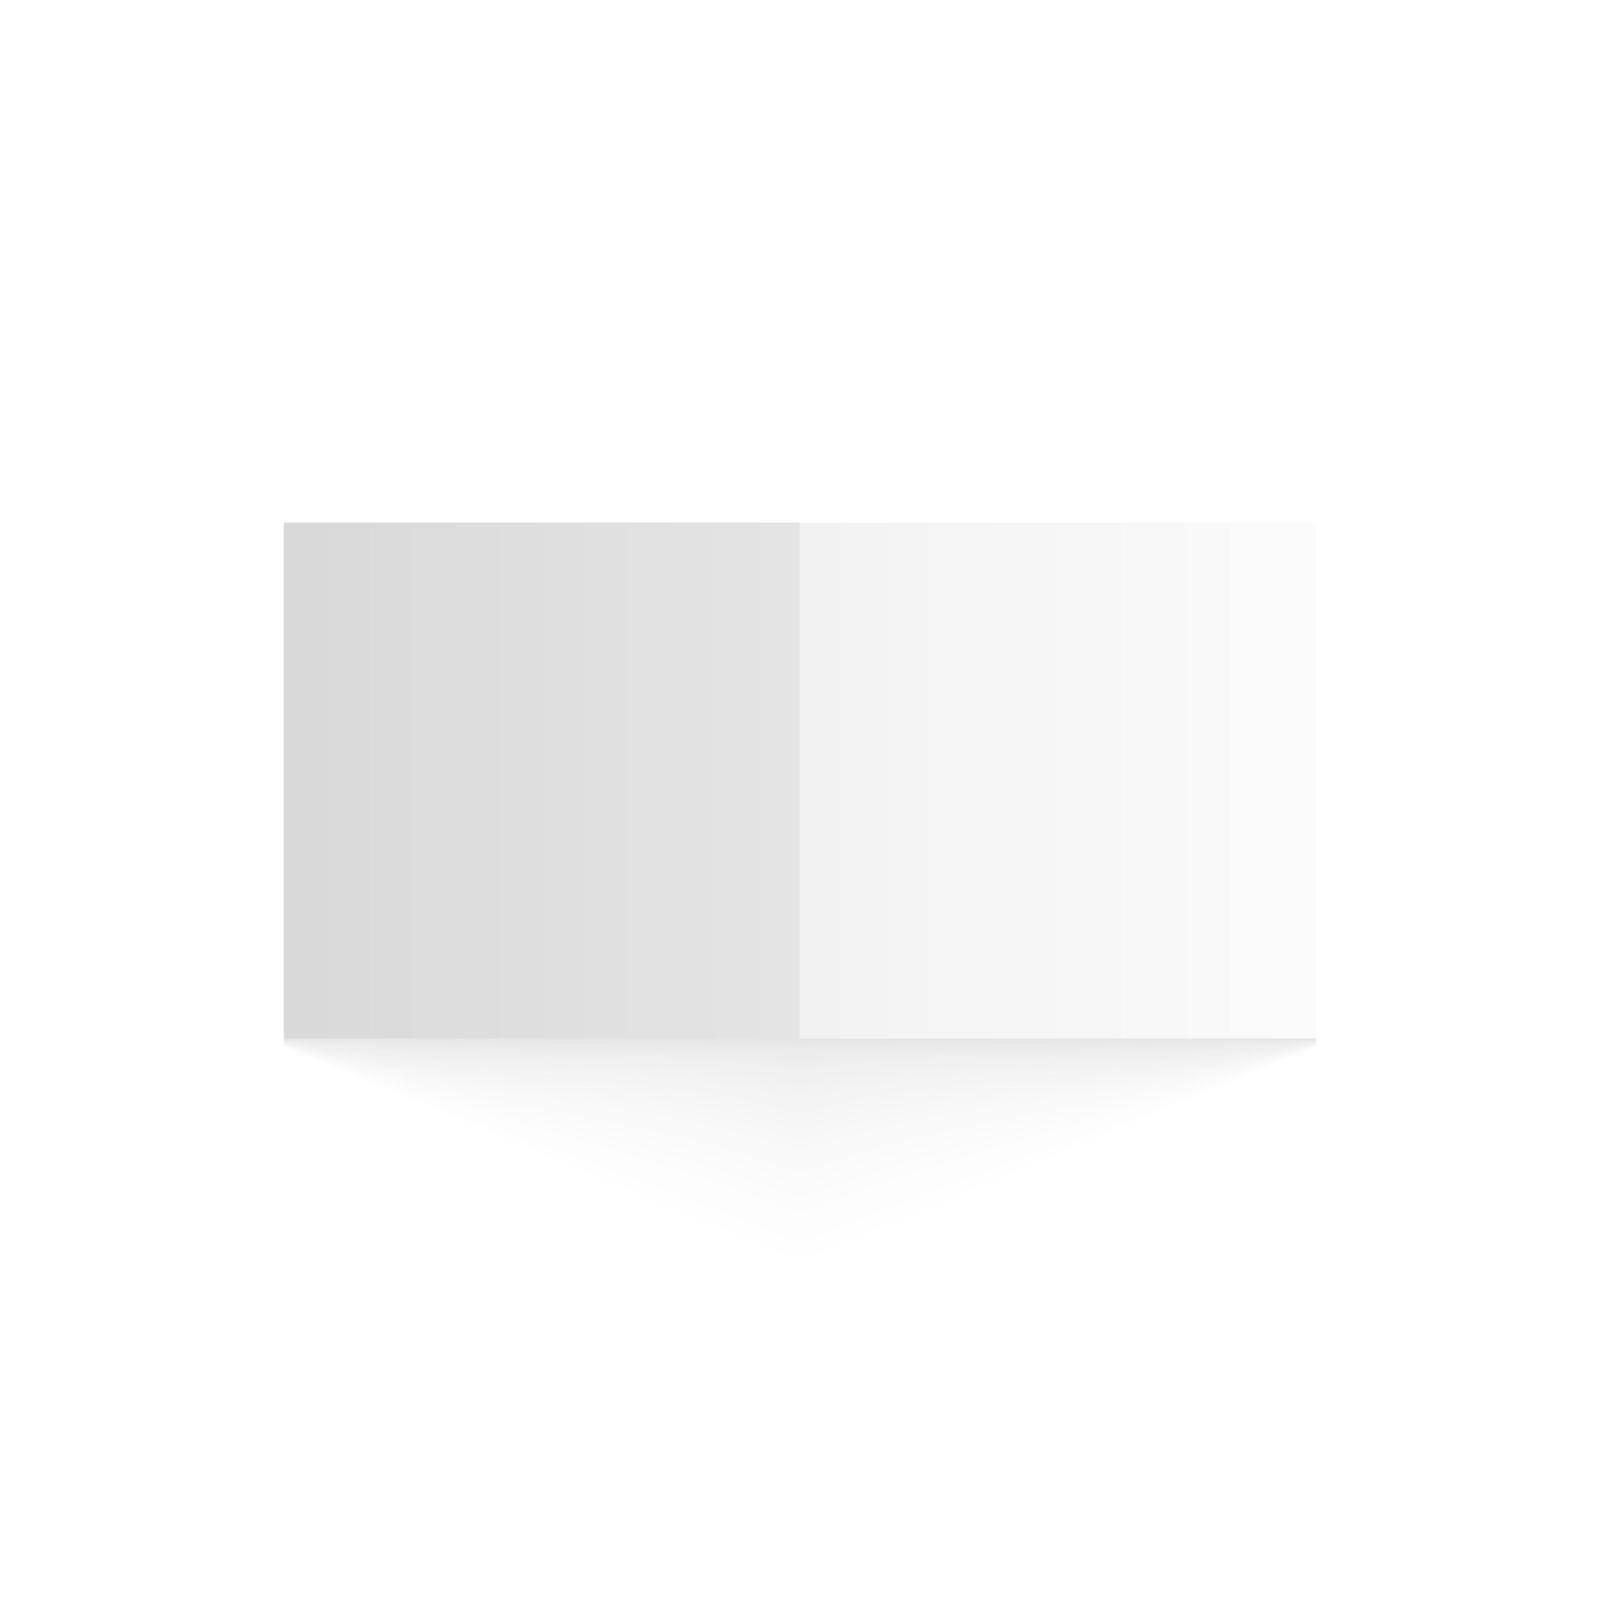 Realistic White Cube With Shadow. EPS10 Vector